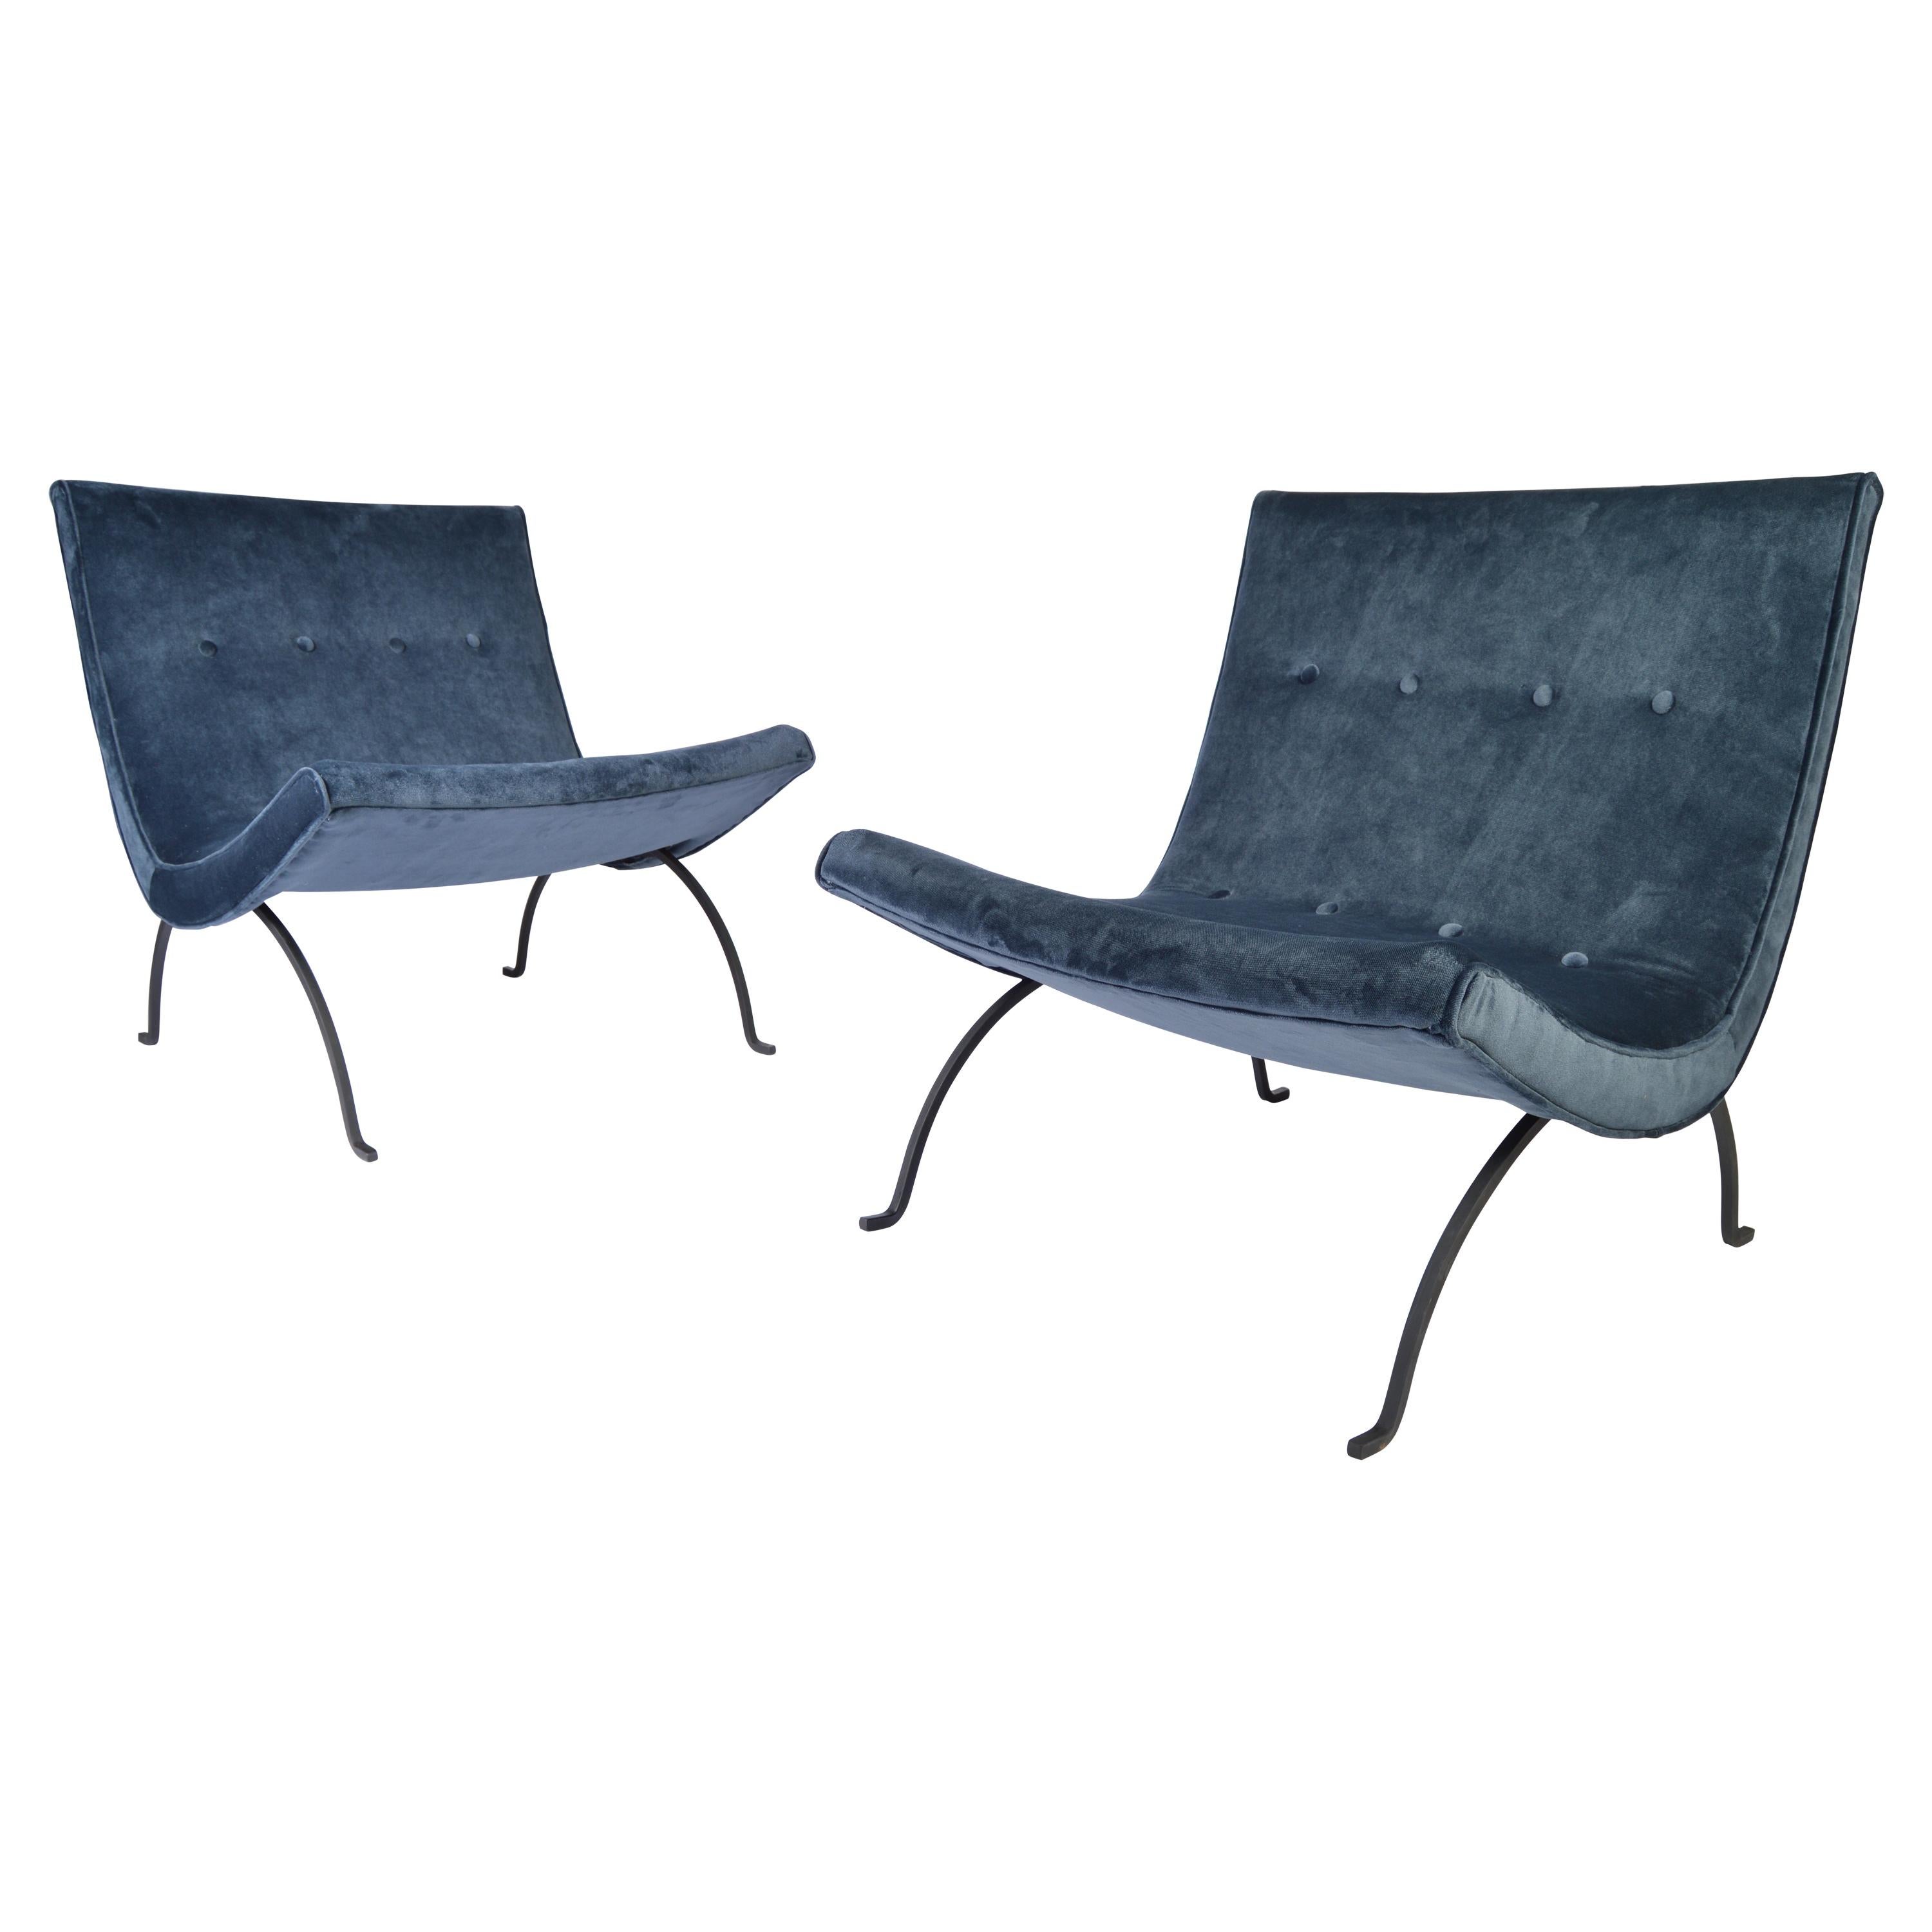 Early Pair of Milo Baughman Scoop Lounge Chairs, circa 1950